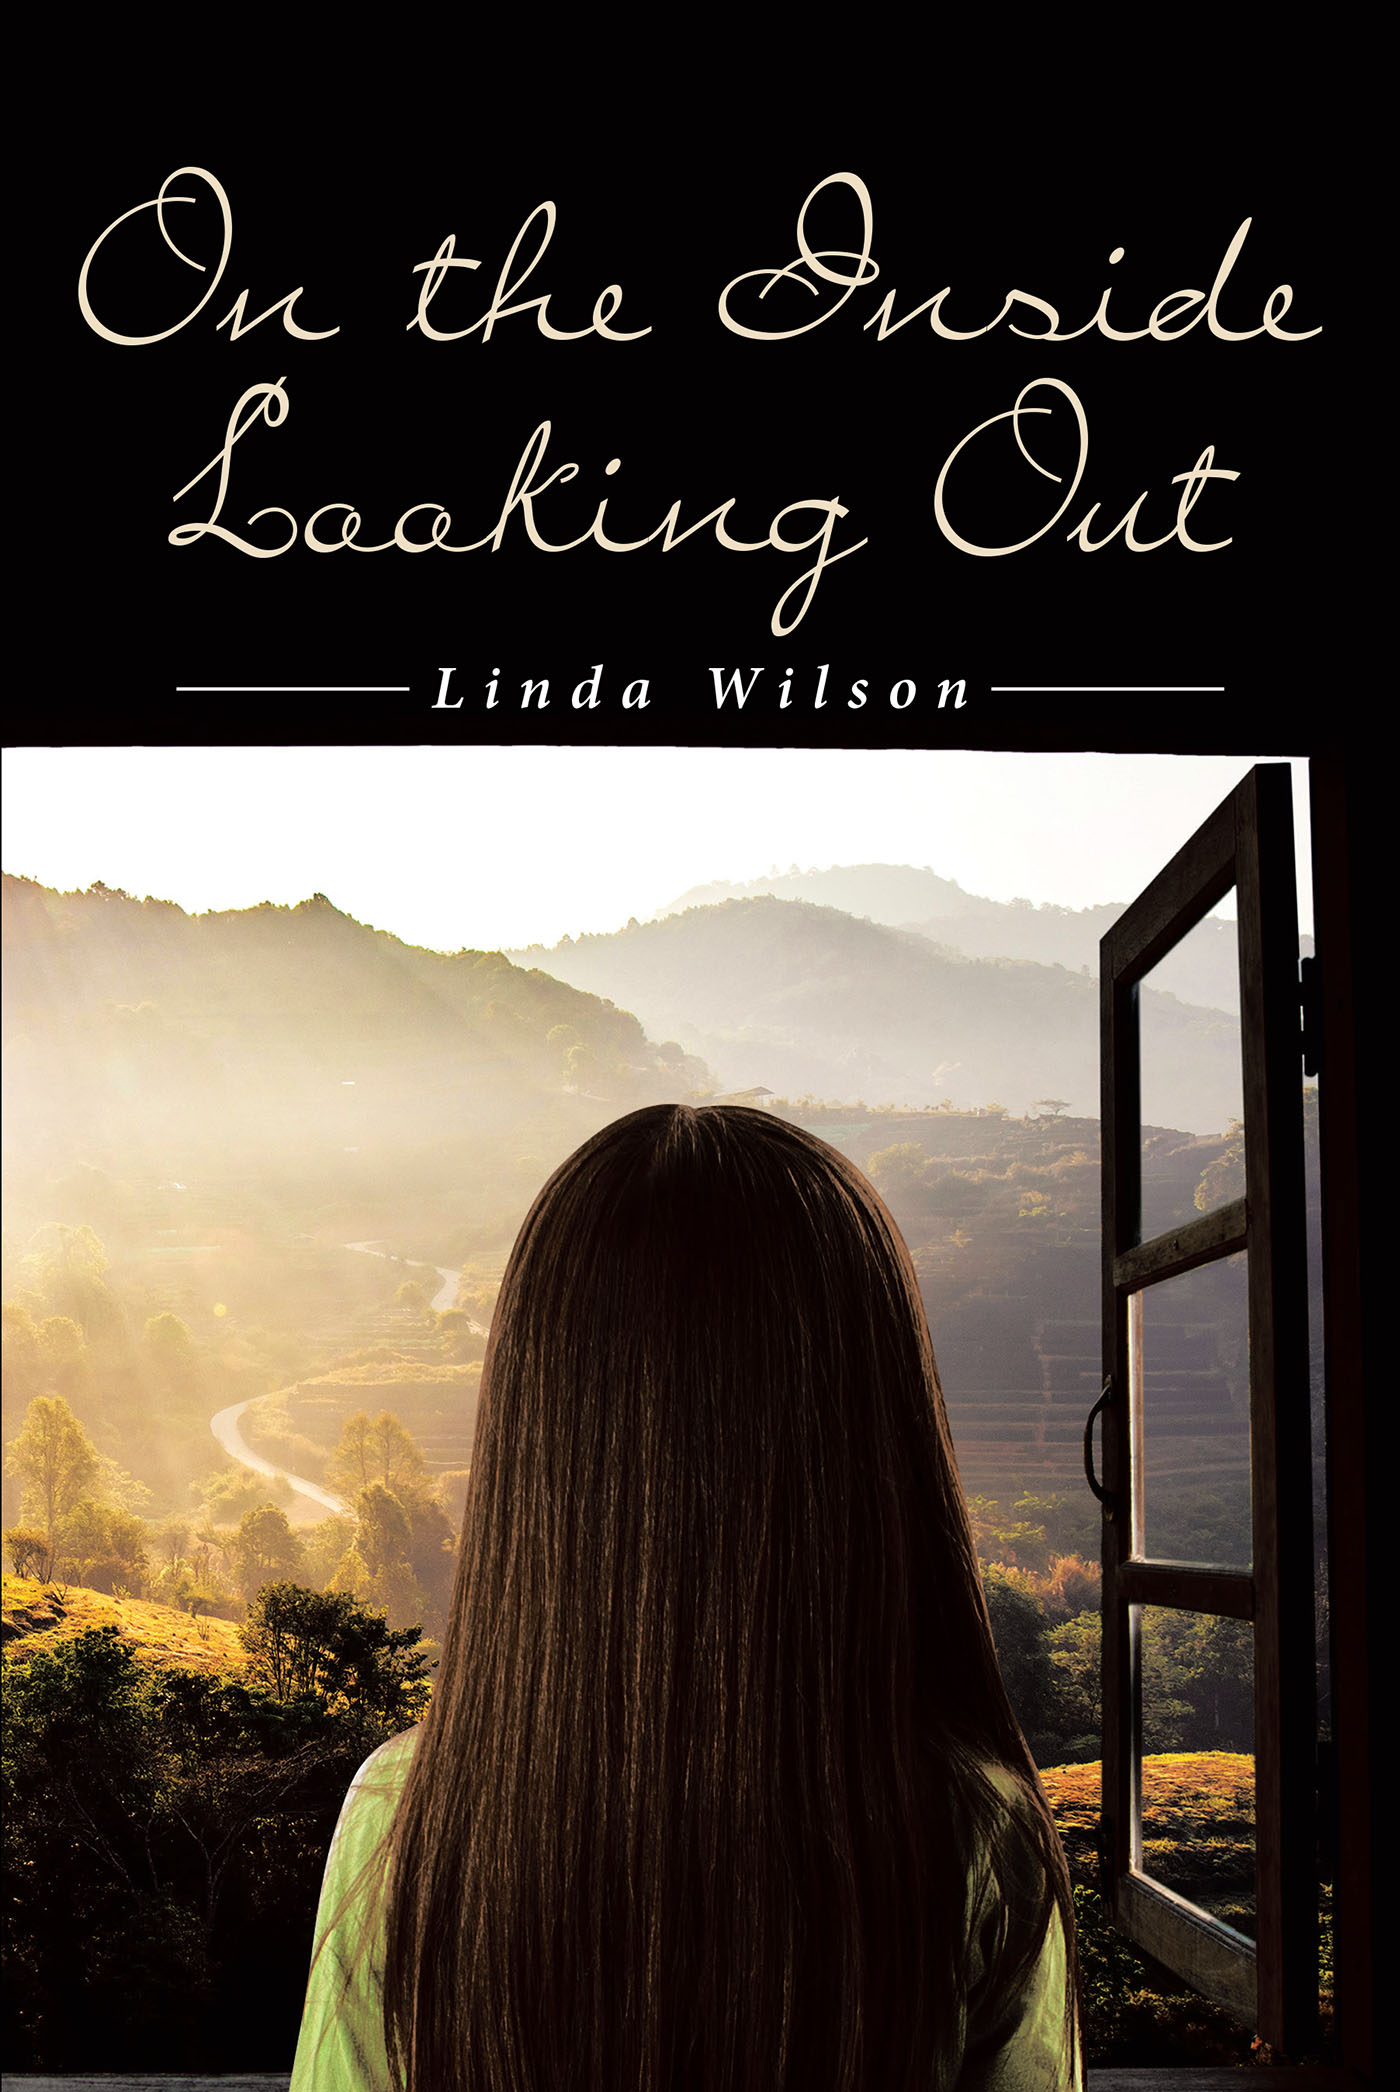 Linda Wilson’s New Book, "On the Inside Looking Out," is an Intensive and Compelling Story That Follows the Author’s Powerful Family Story